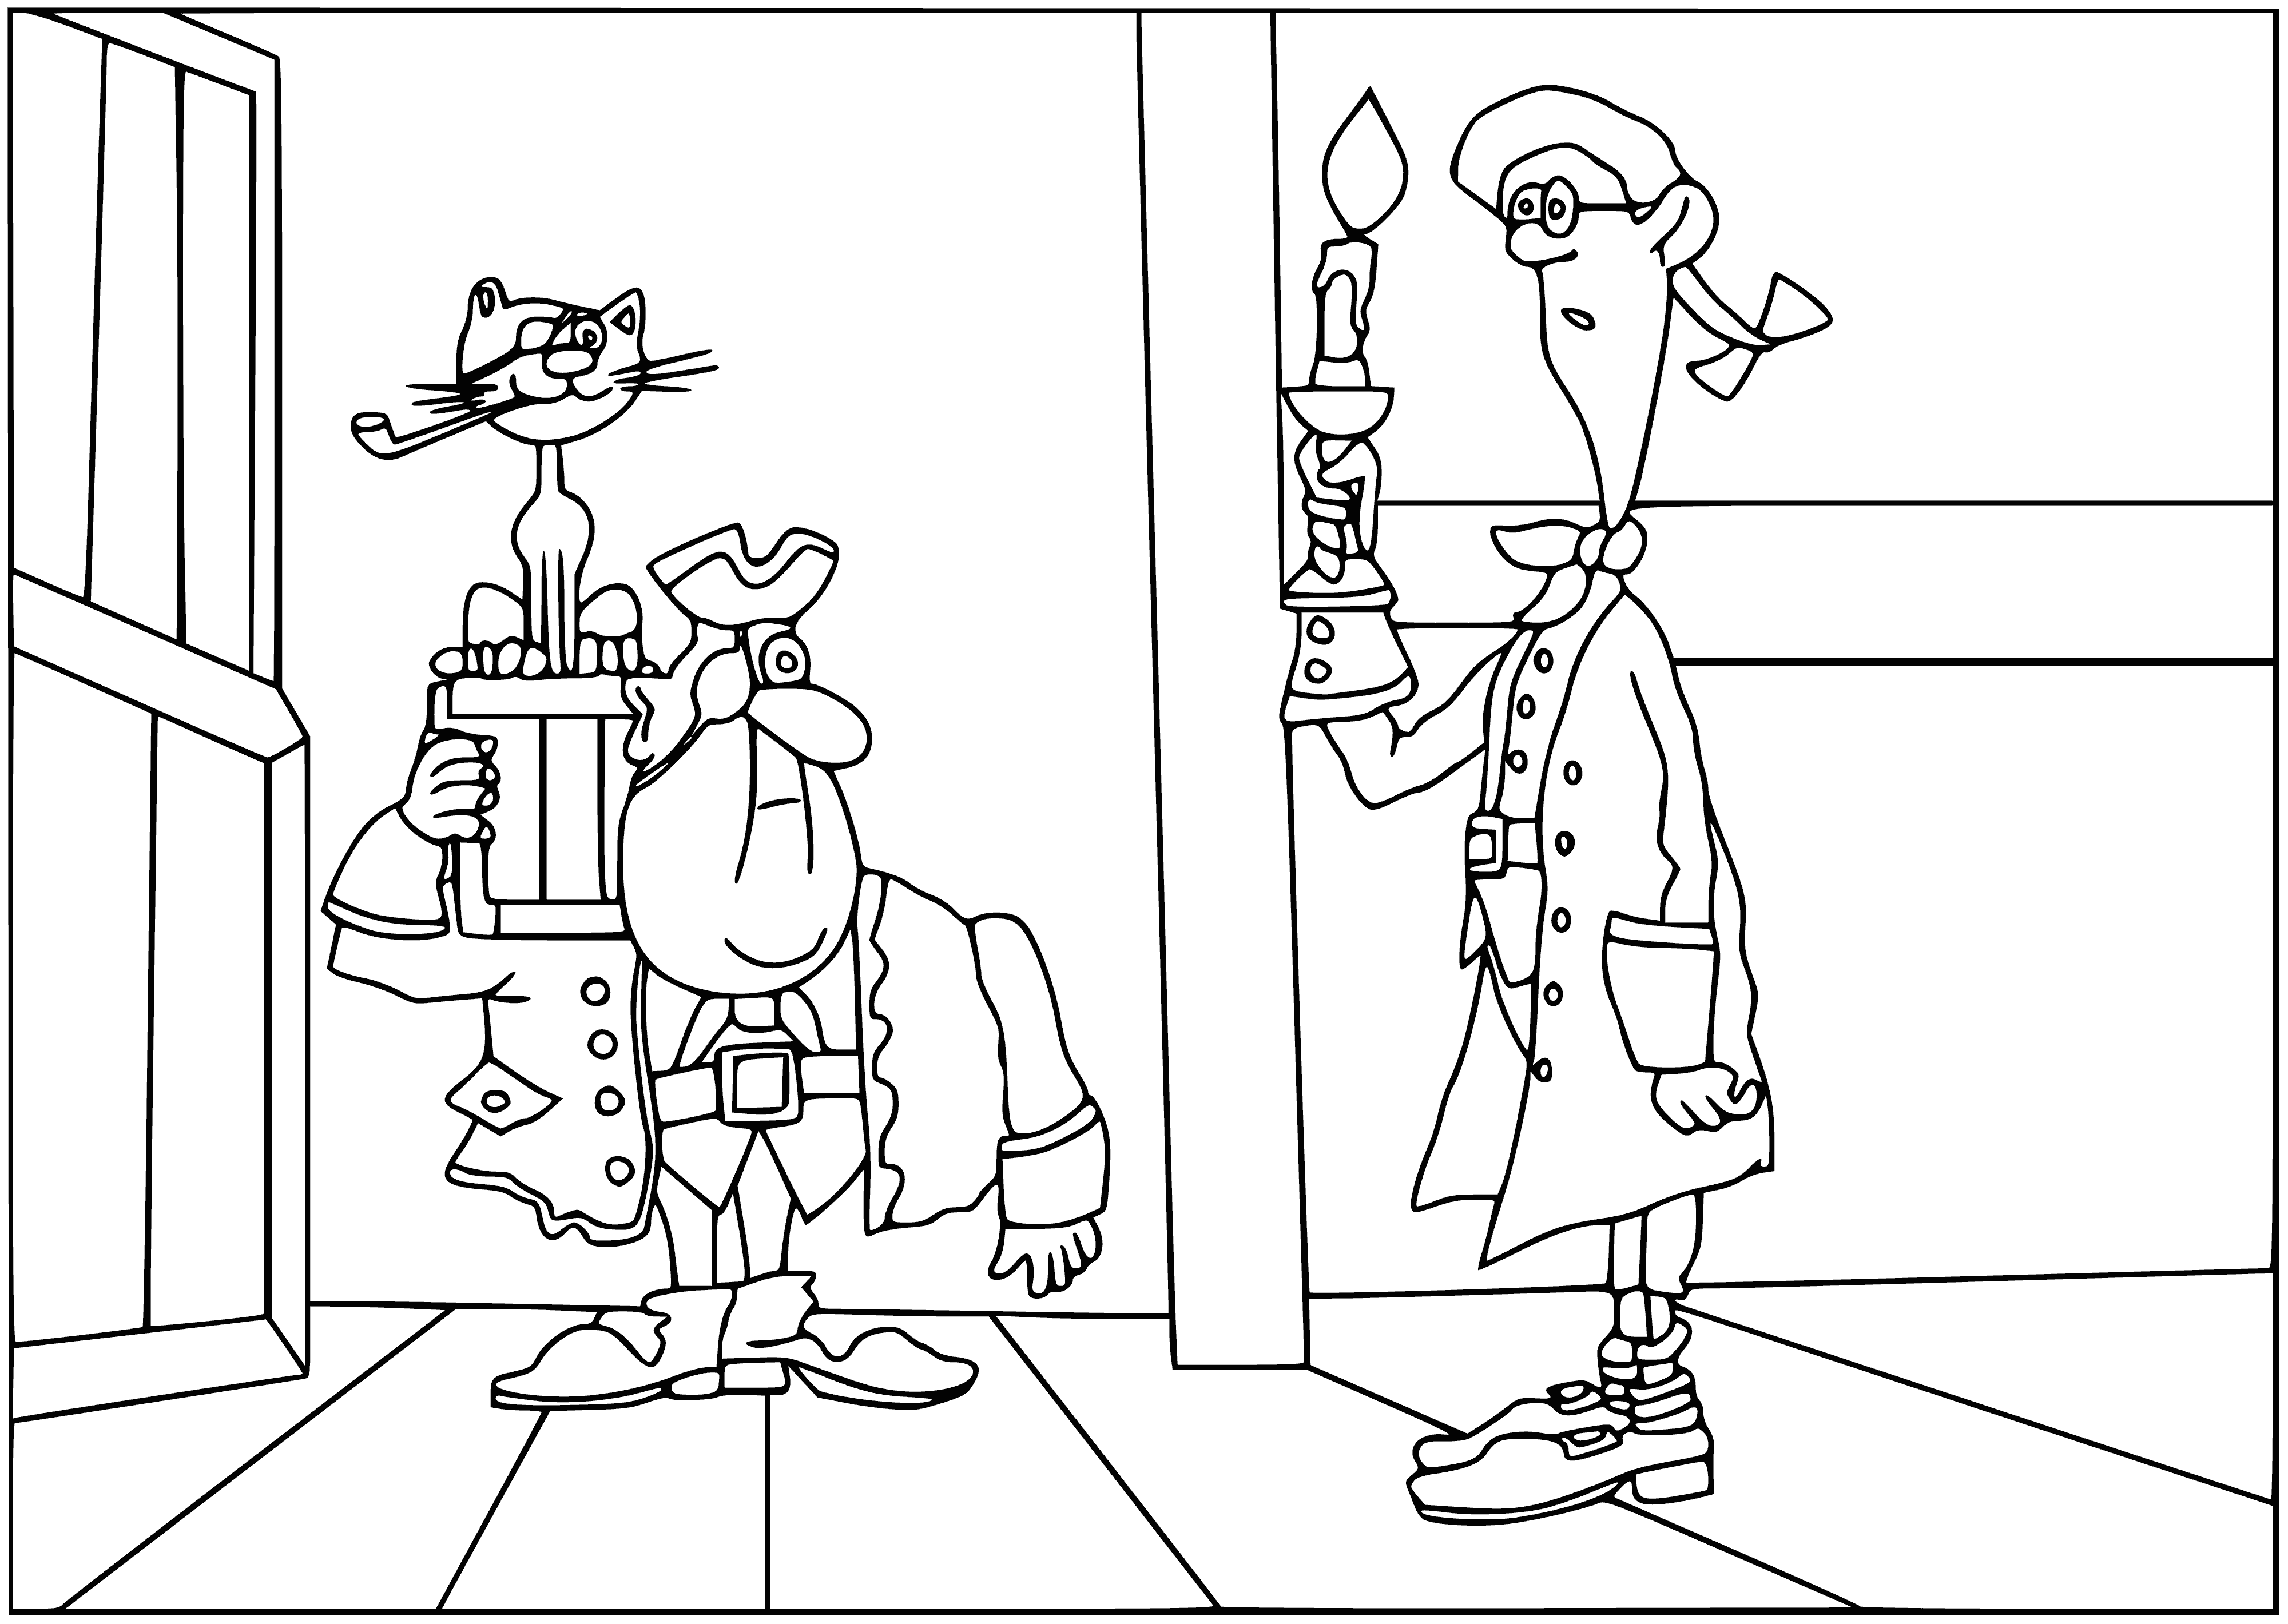 coloring page: Jim Hawkins sees a large pirate ship docked with many pirates milling about and a skull and crossbones flag flying. In the background a small island with palm trees. He stands worryingly on the dock.